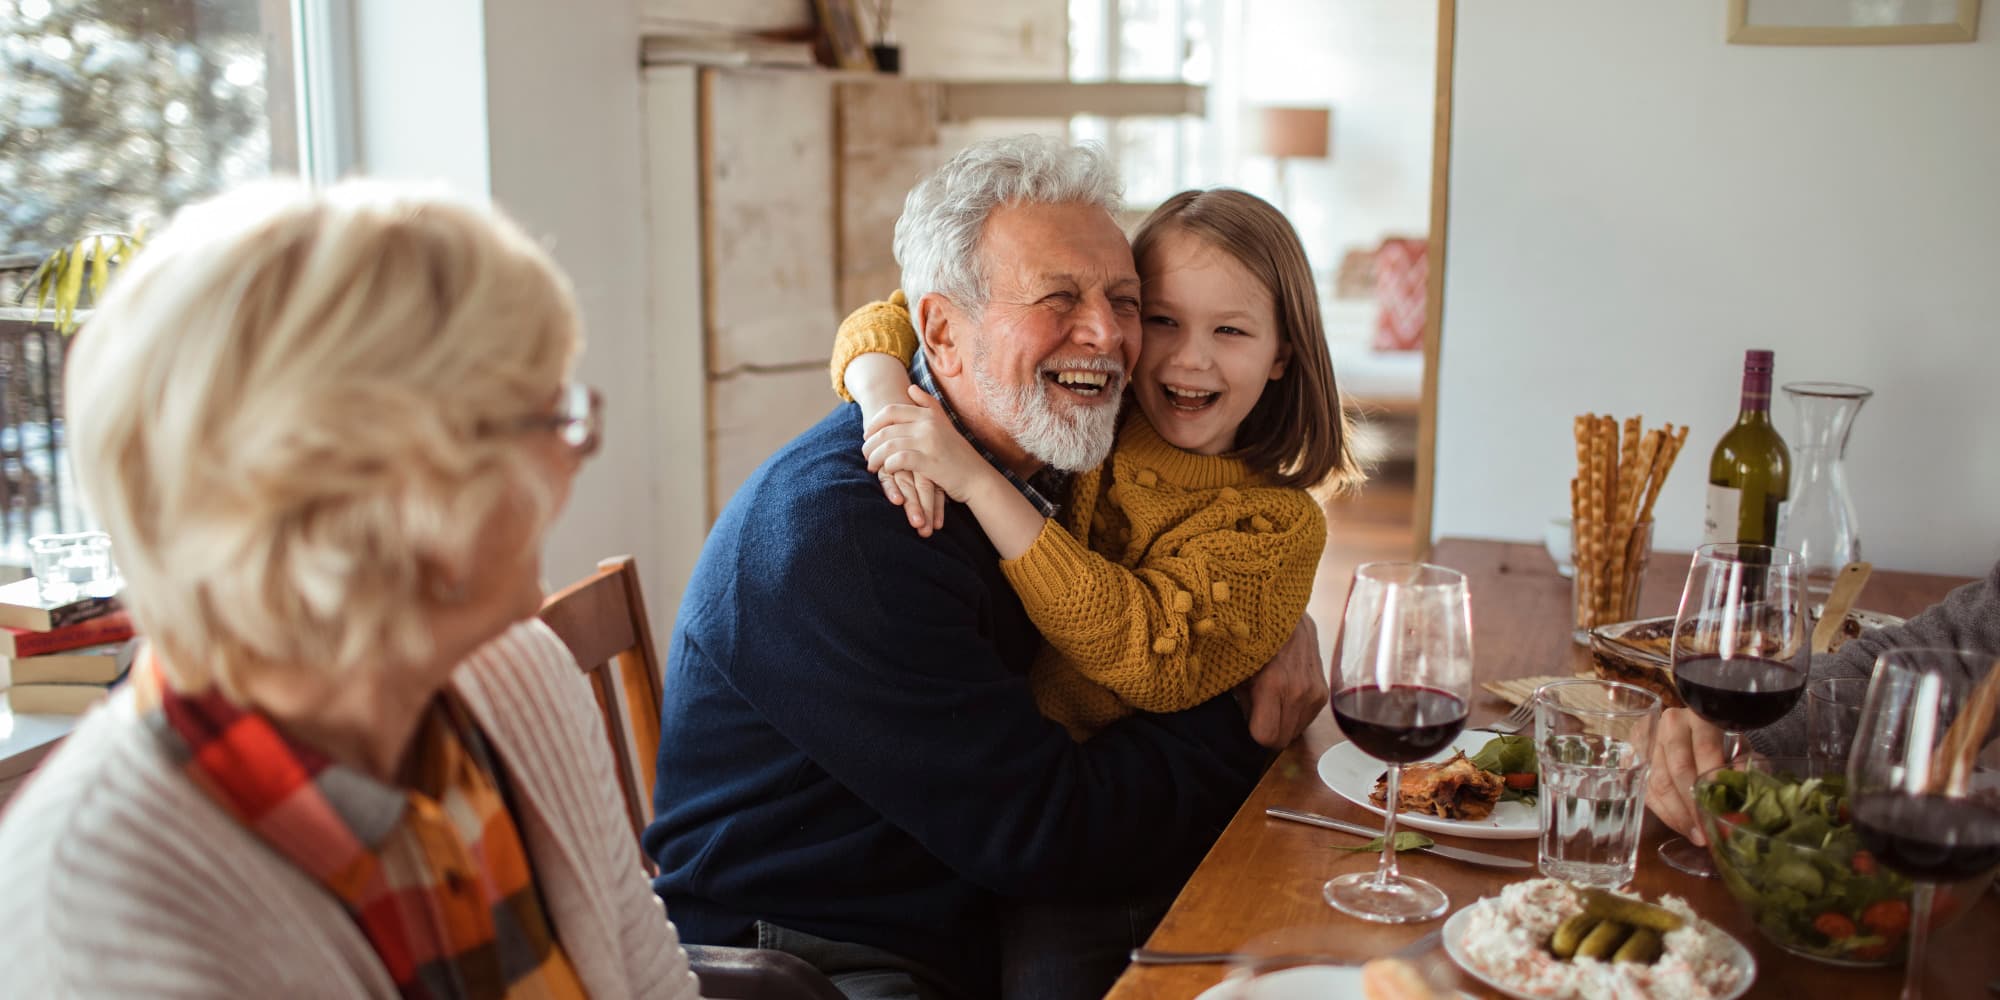 A grandfather laughing as a granddaughter hugs him at the dinner table with the grandmother looking on with hippieness.